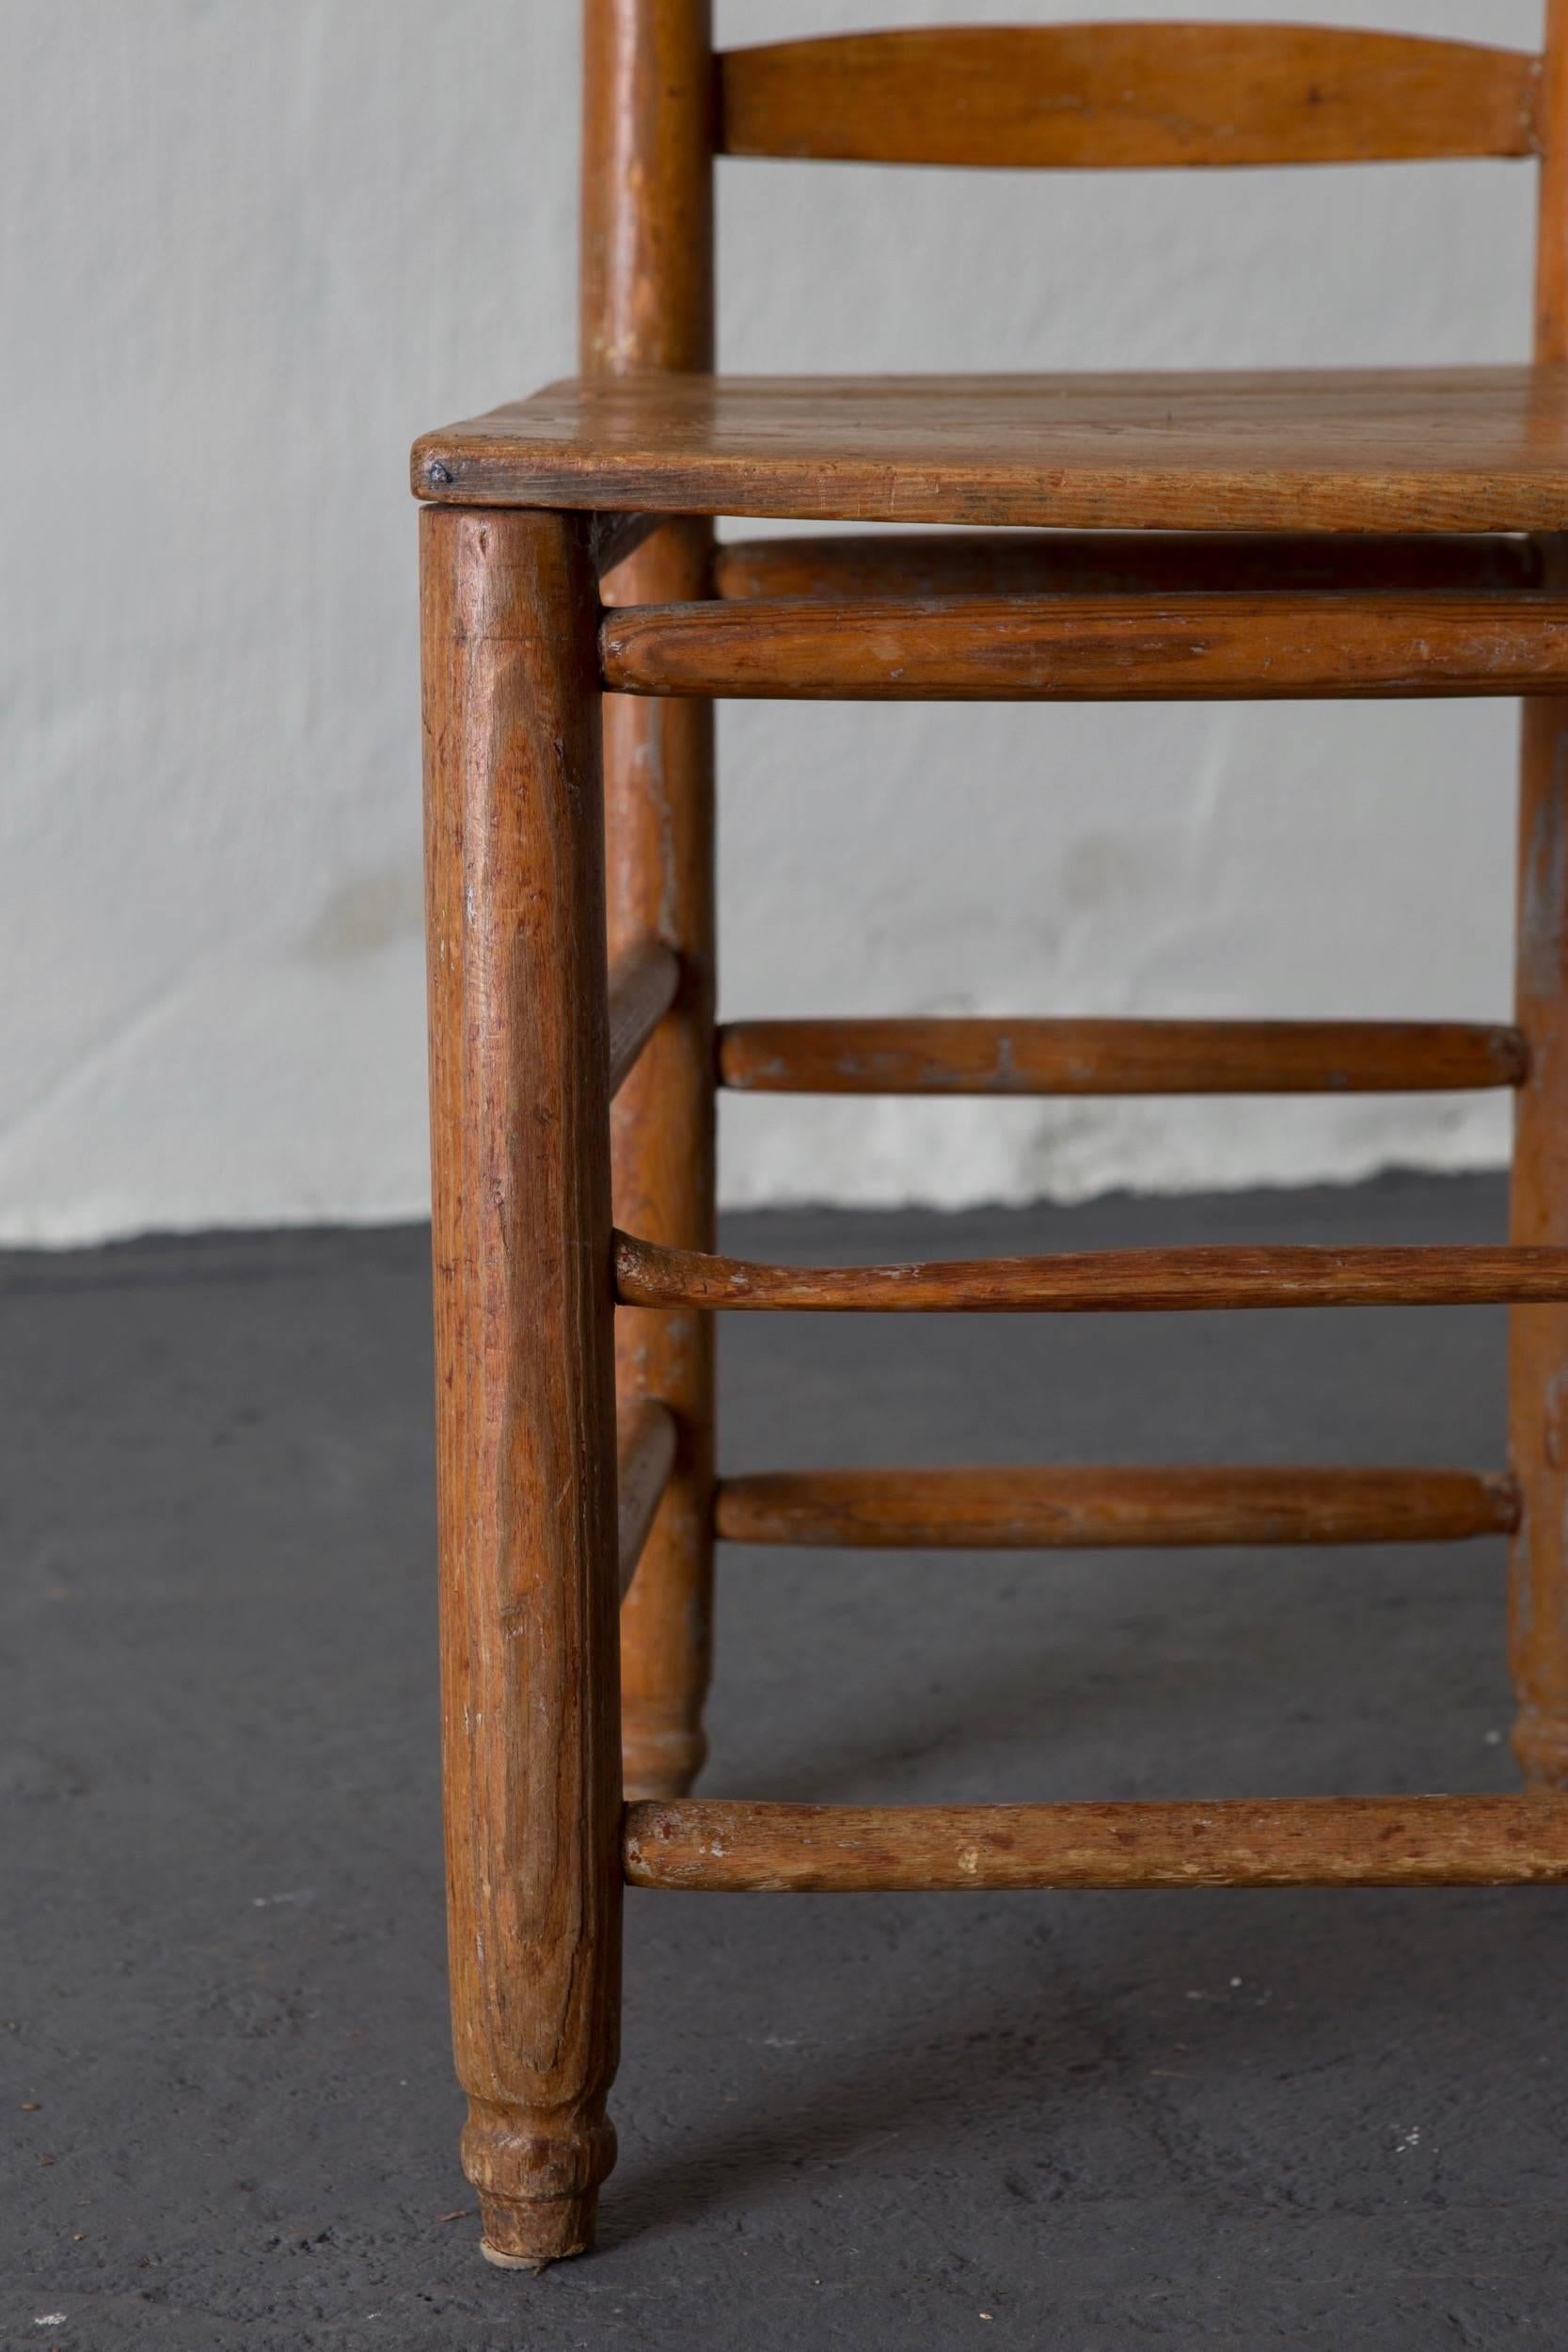 A Swedish side chair made during the early 19th century in Sweden. Original finish.

 